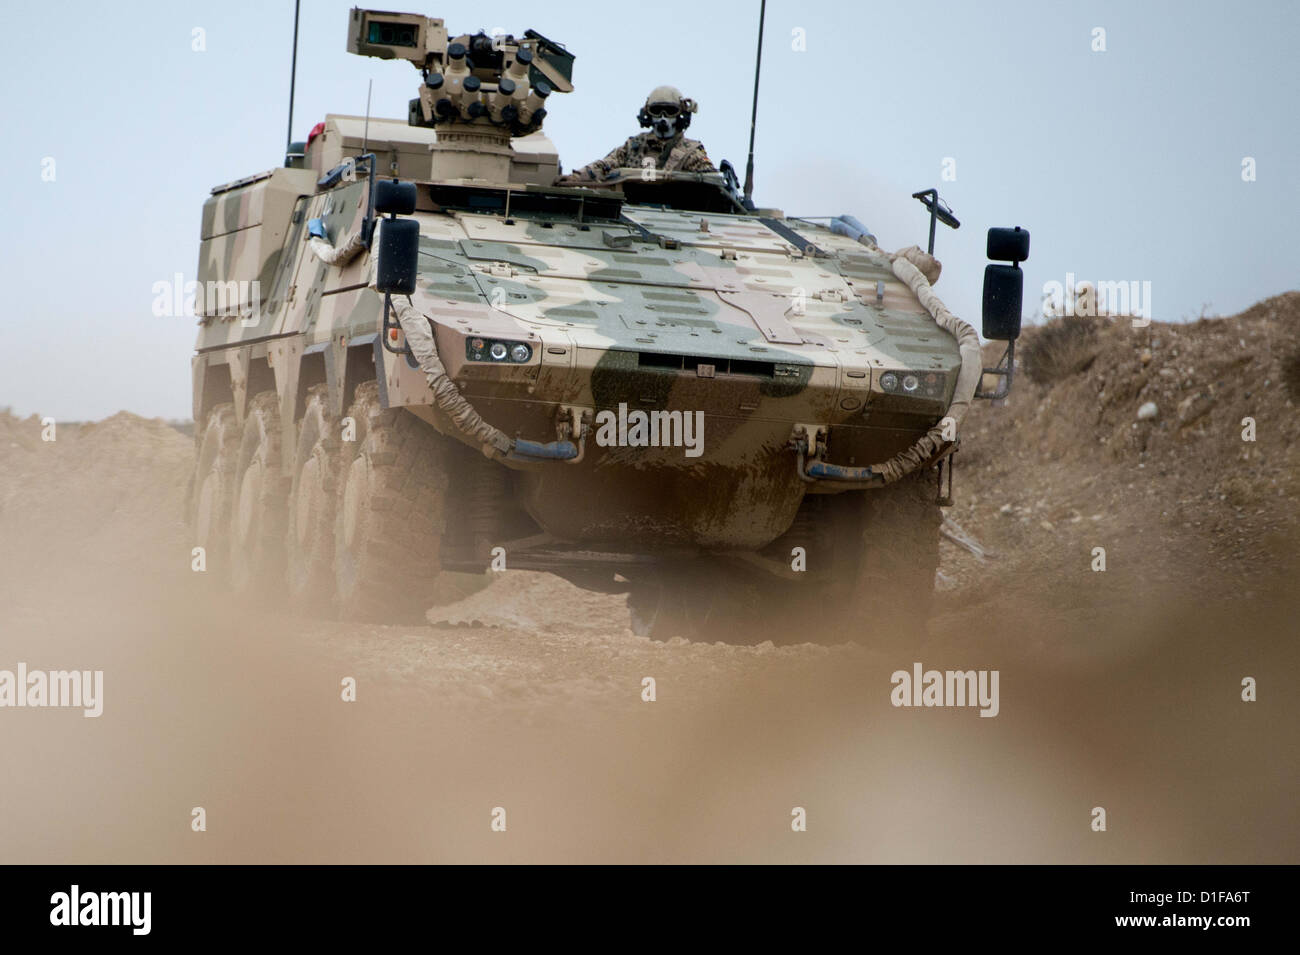 A Boxer tank of the German Armed Forces is seen in Masar-i-Scharif, Afghanistan, 17 December 2012. PHOTO: MAURIZIO GAMBARINI Stock Photo